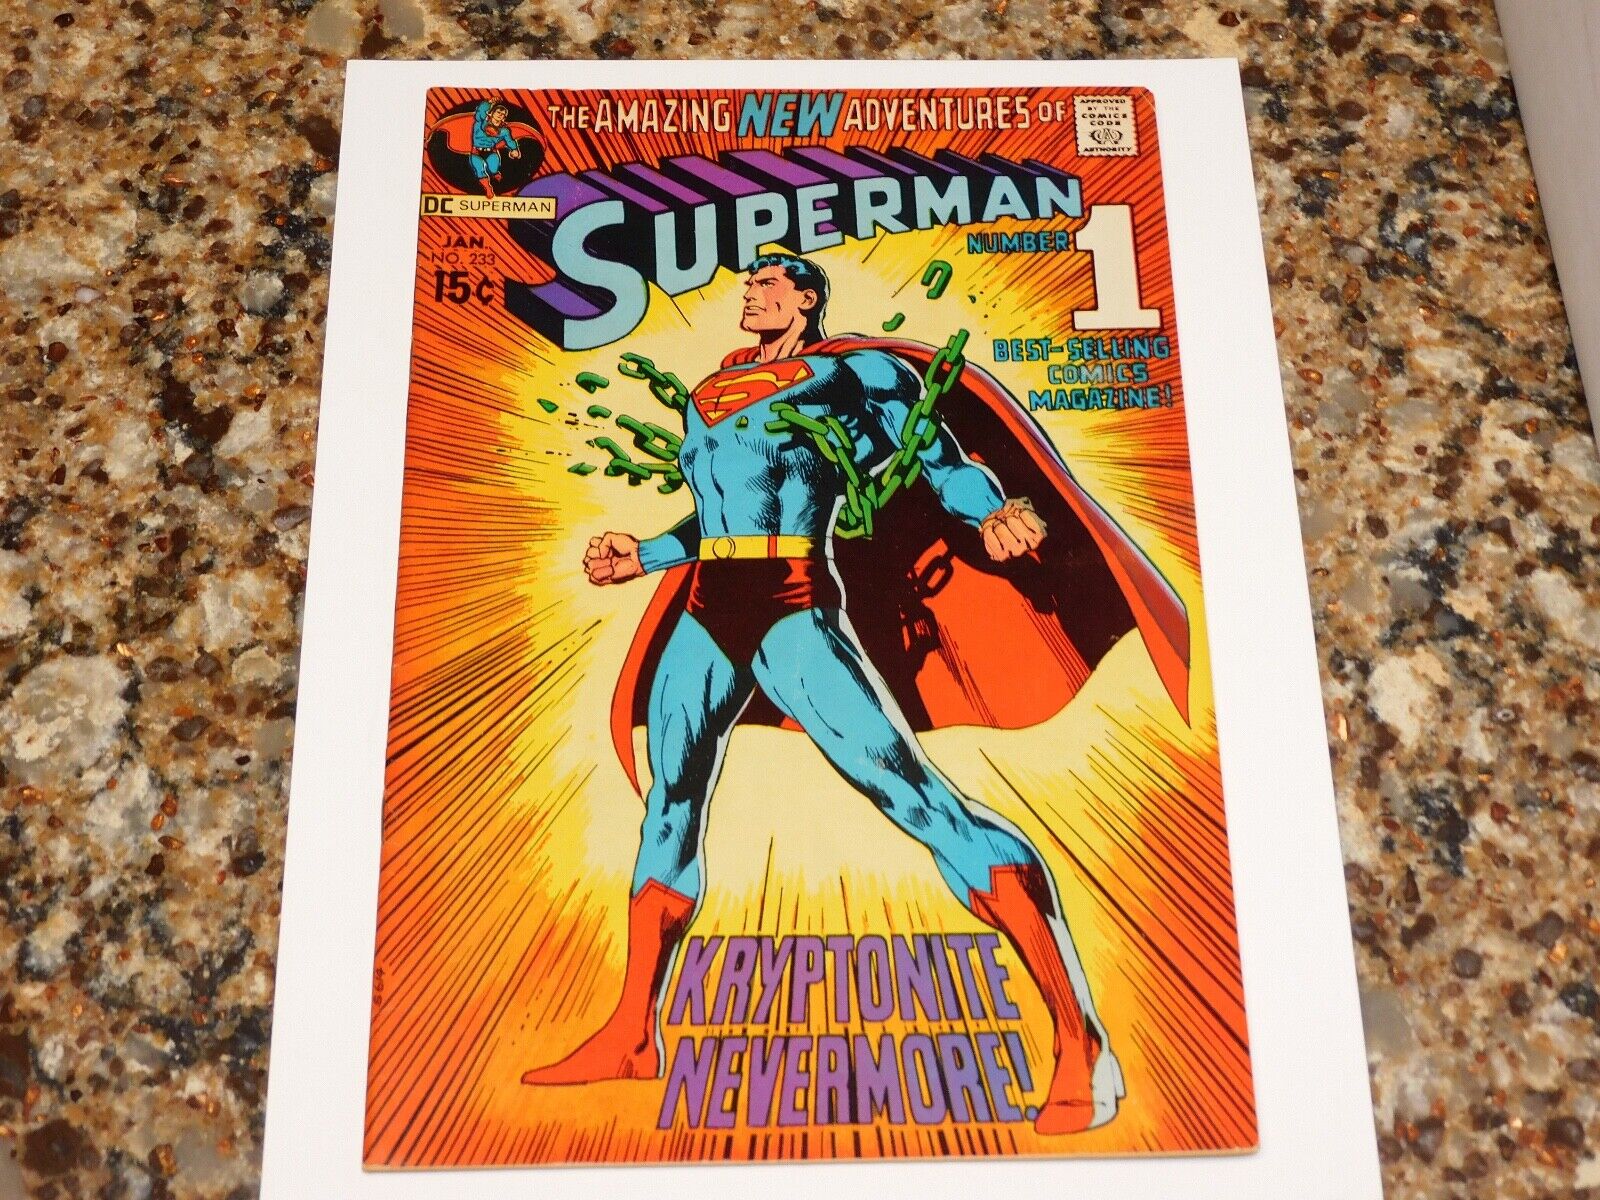 SUPERMAN 233 DC 1978 ICONIC NEAL ADAMS KRYPTONITE NEVERMORE MUST SEE